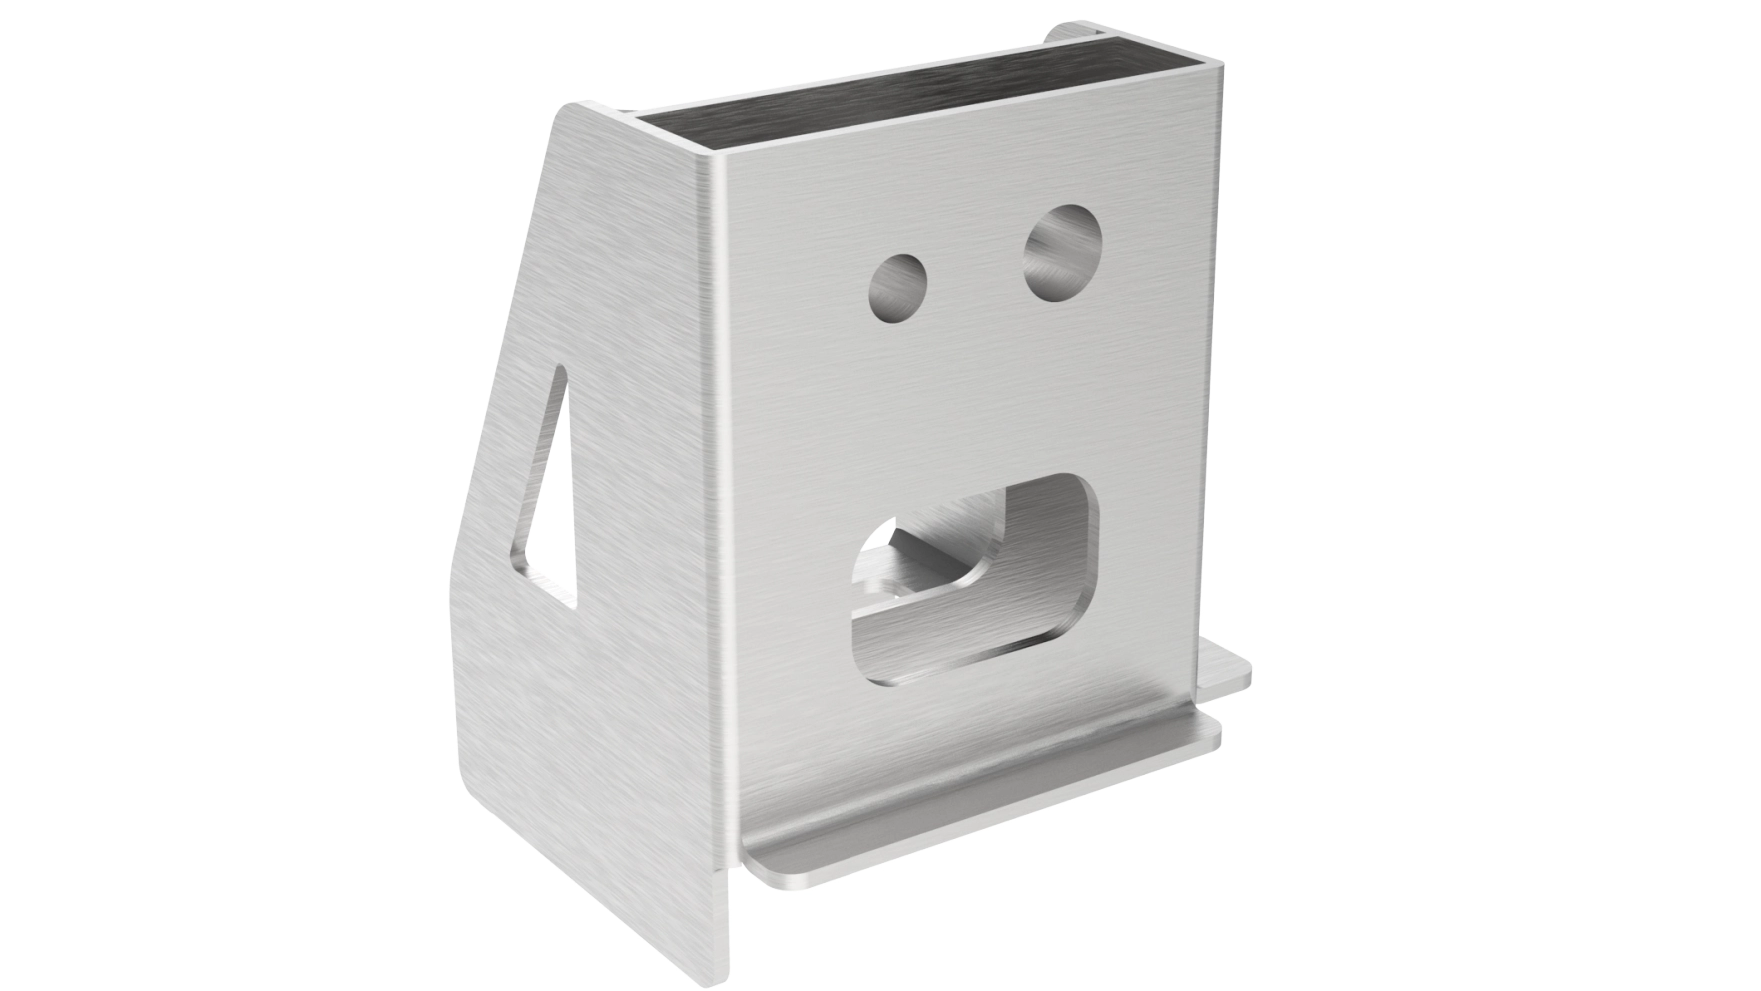 Stainless Steel Switch Plates Stand Out for Their Durability And Safety